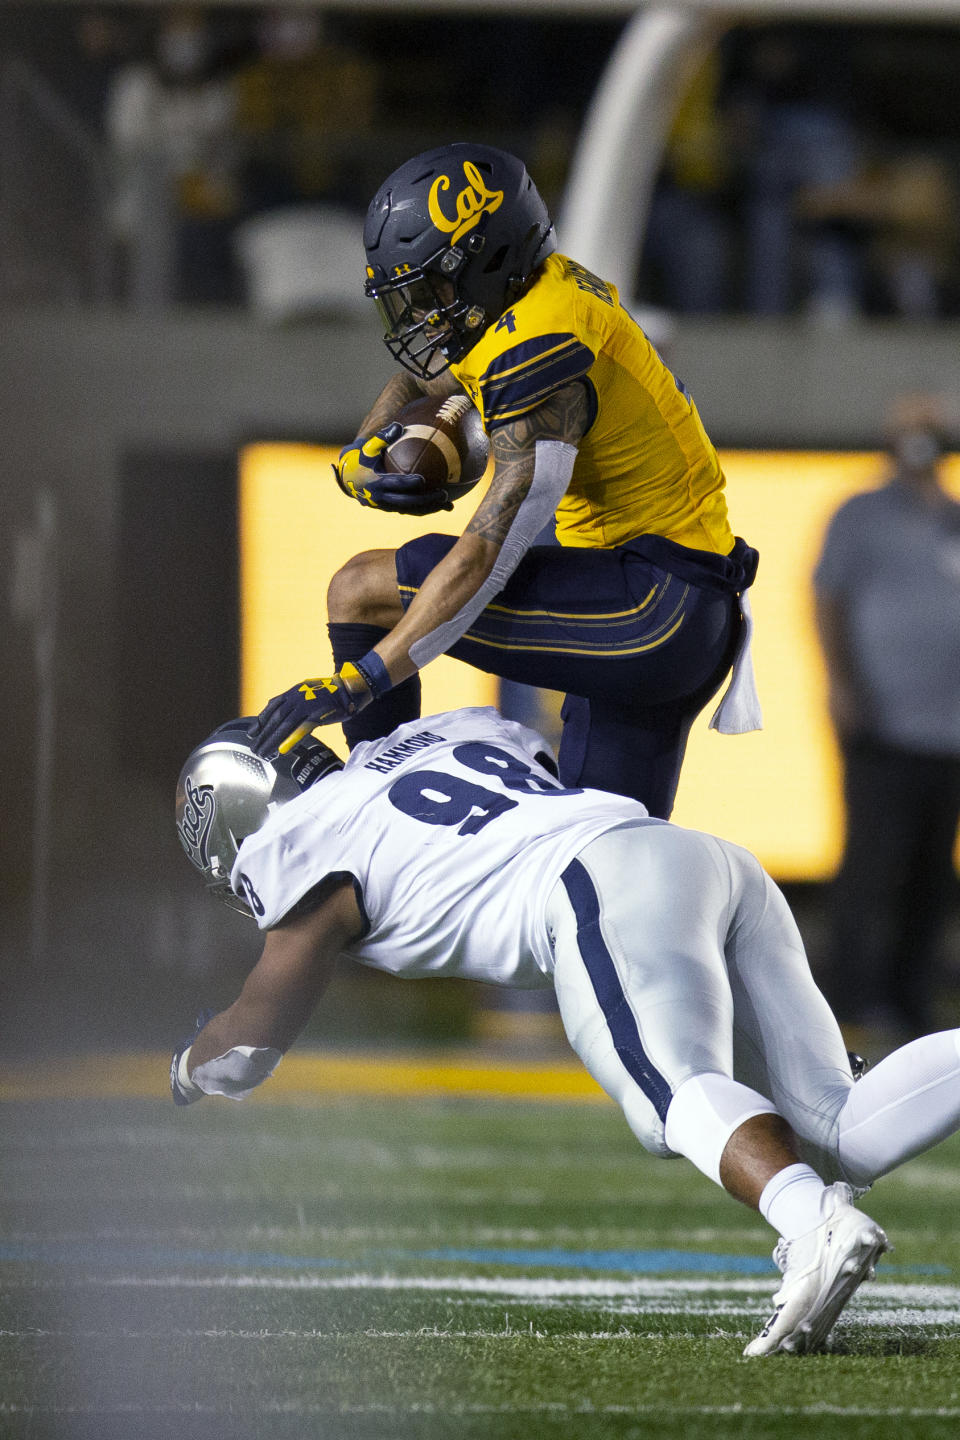 California wide receiver Nikko Remigio (4) hurdles Nevada defensive end Sam Hammond (98) during the first quarter of an NCAA college football game Saturday, Sept. 4, 2021, in Berkeley, Calif. (AP Photo/D. Ross Cameron)